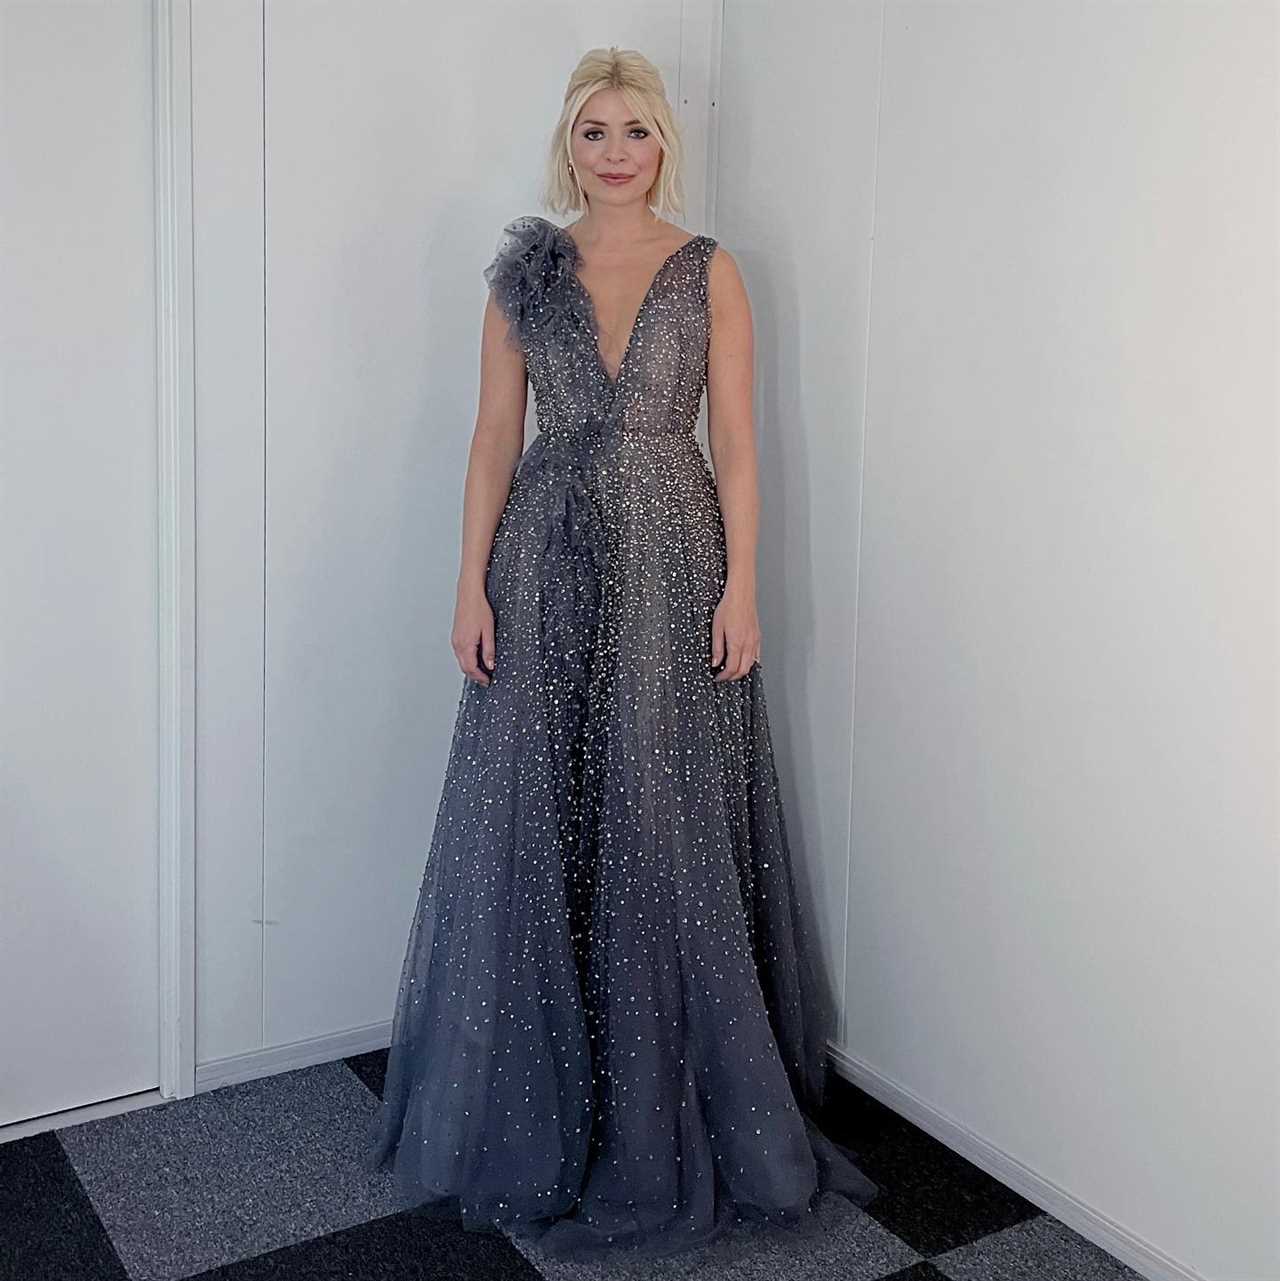 Holly Willoughby unveiled her look for Dancing On Ice and posed in a sparkly designer gown